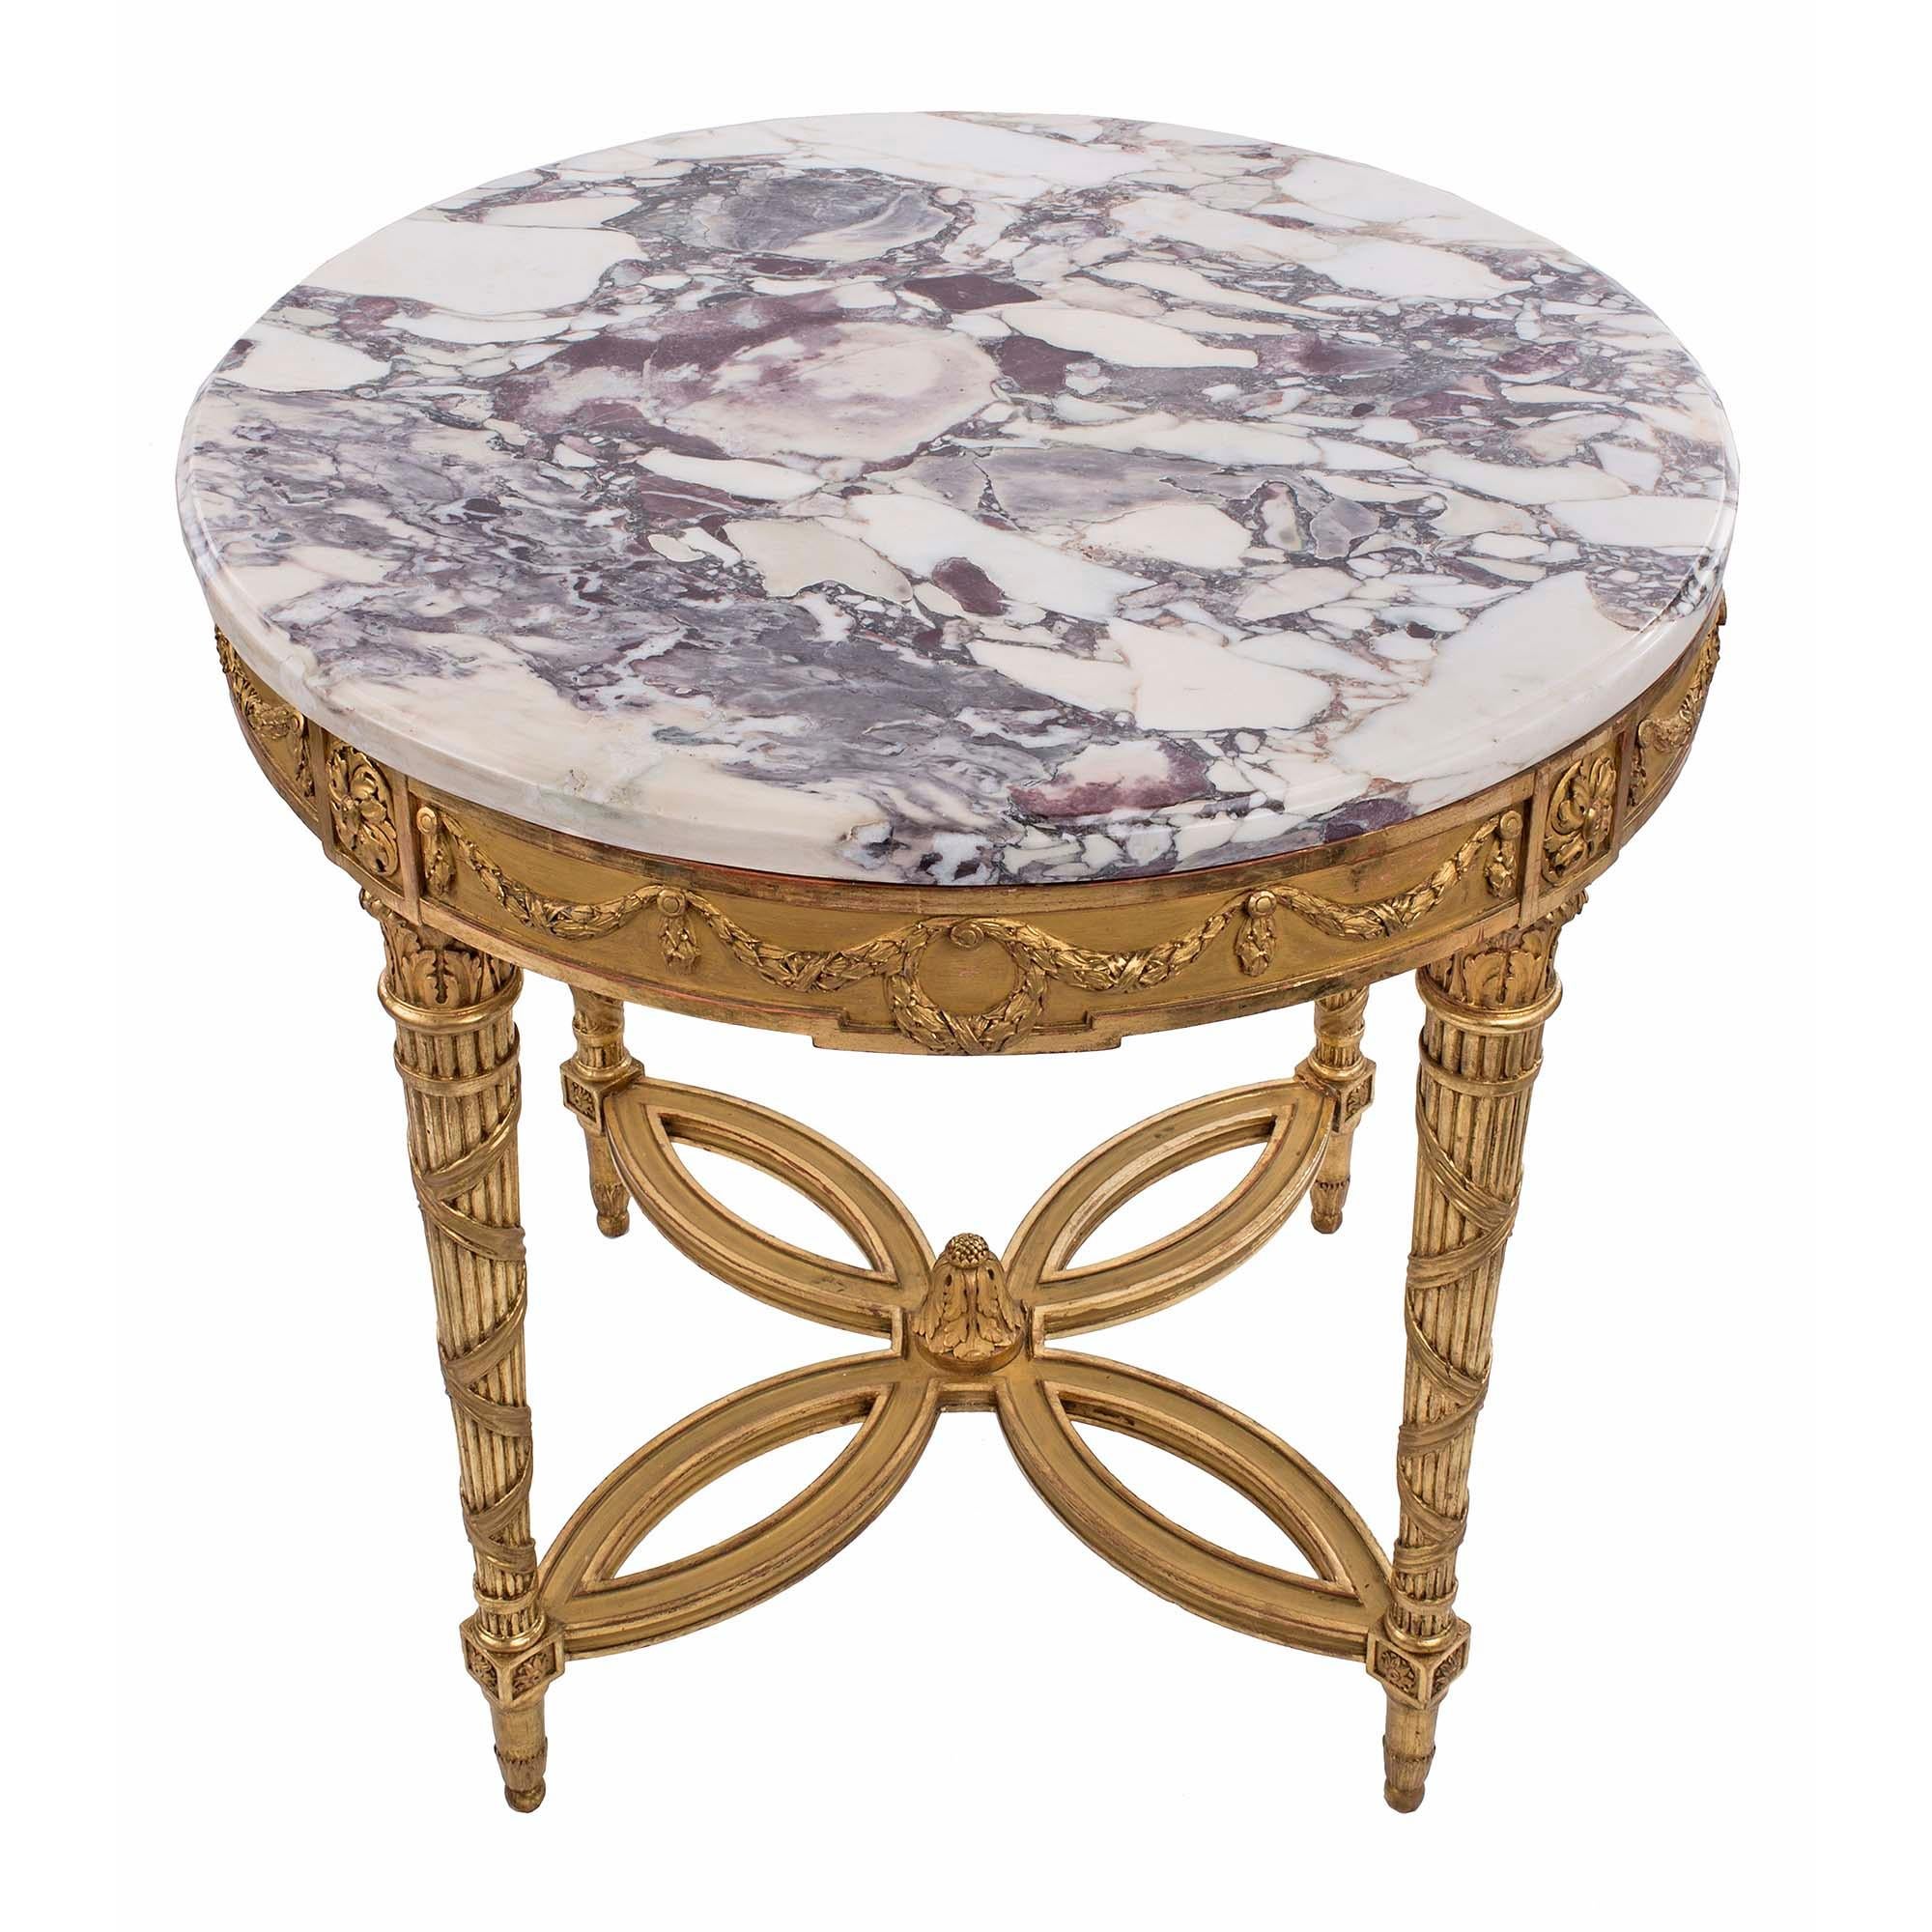 An elegant French 19th century Louis XVI st. giltwood and Brèche Médicis circular center table. The table is raised by fine topie shaped feet below richly carved block rosettes and circular tapered reeded legs. Each leg displays a tied ribbon